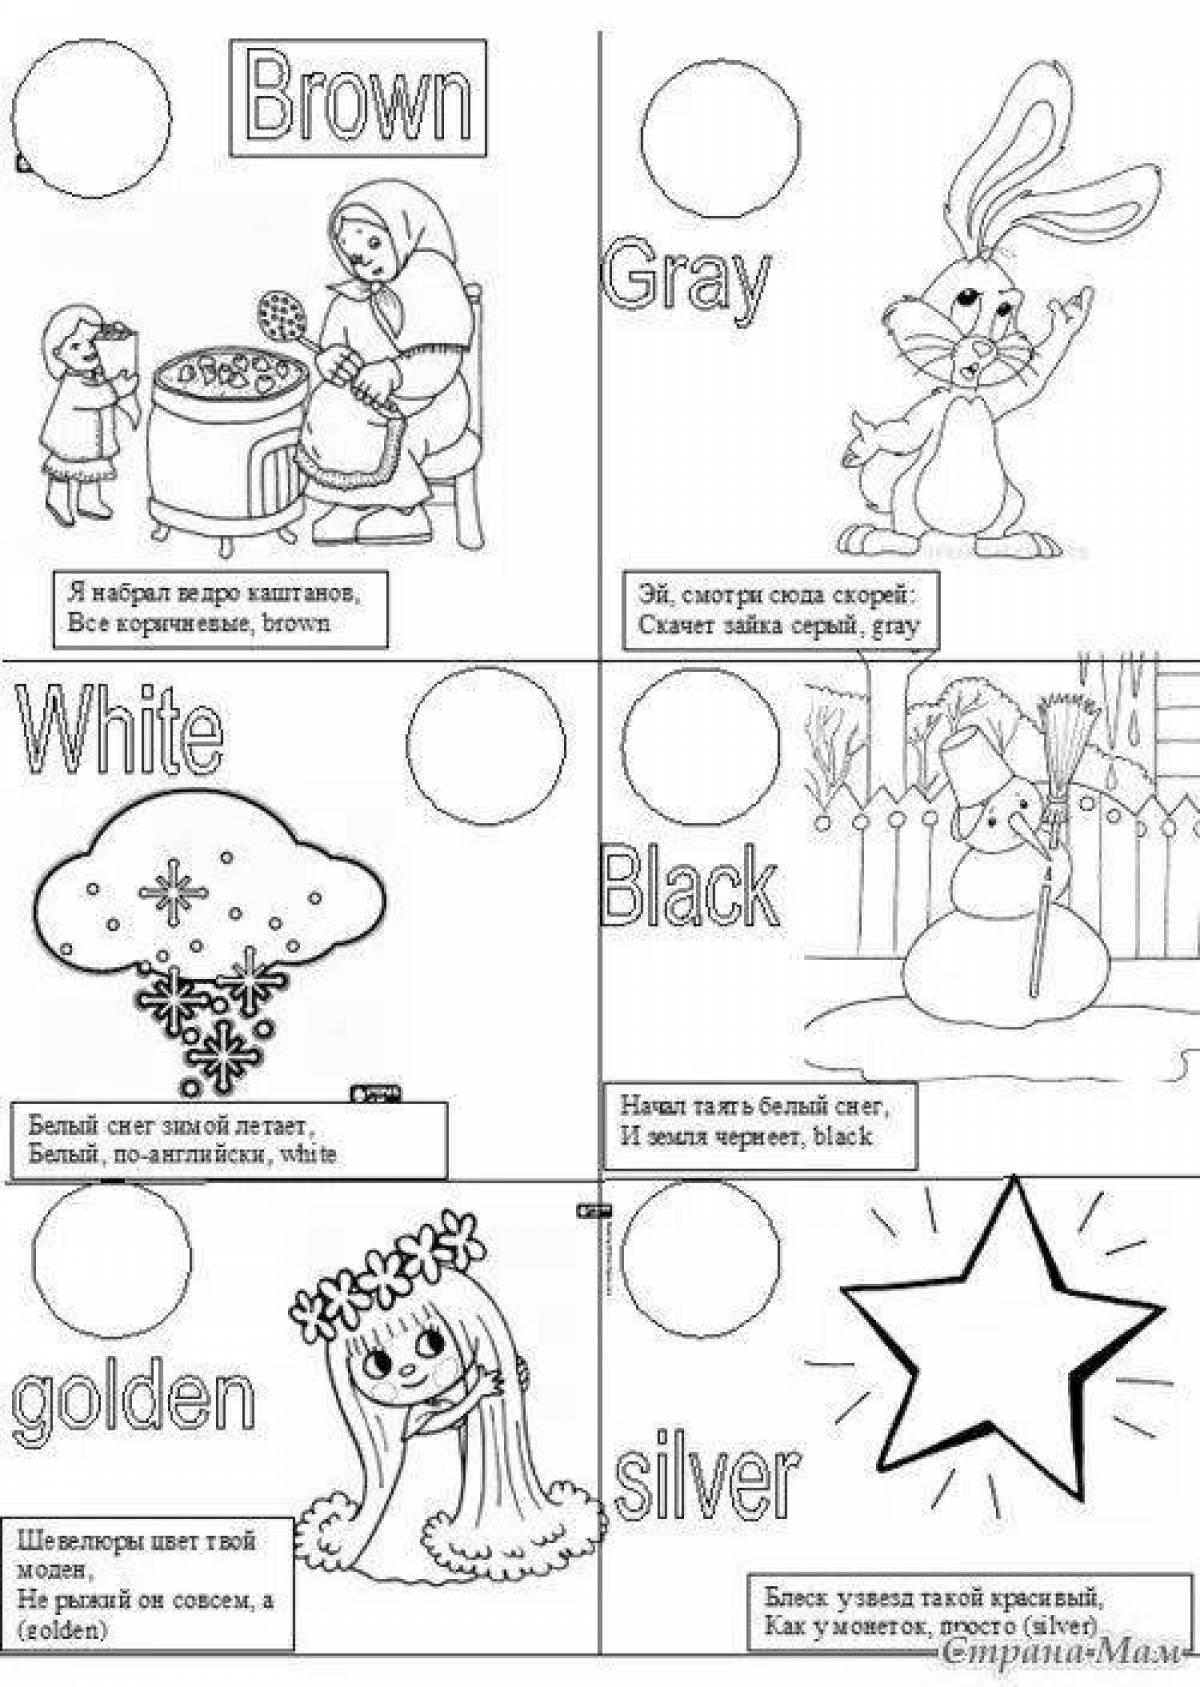 Charming coloring page translation